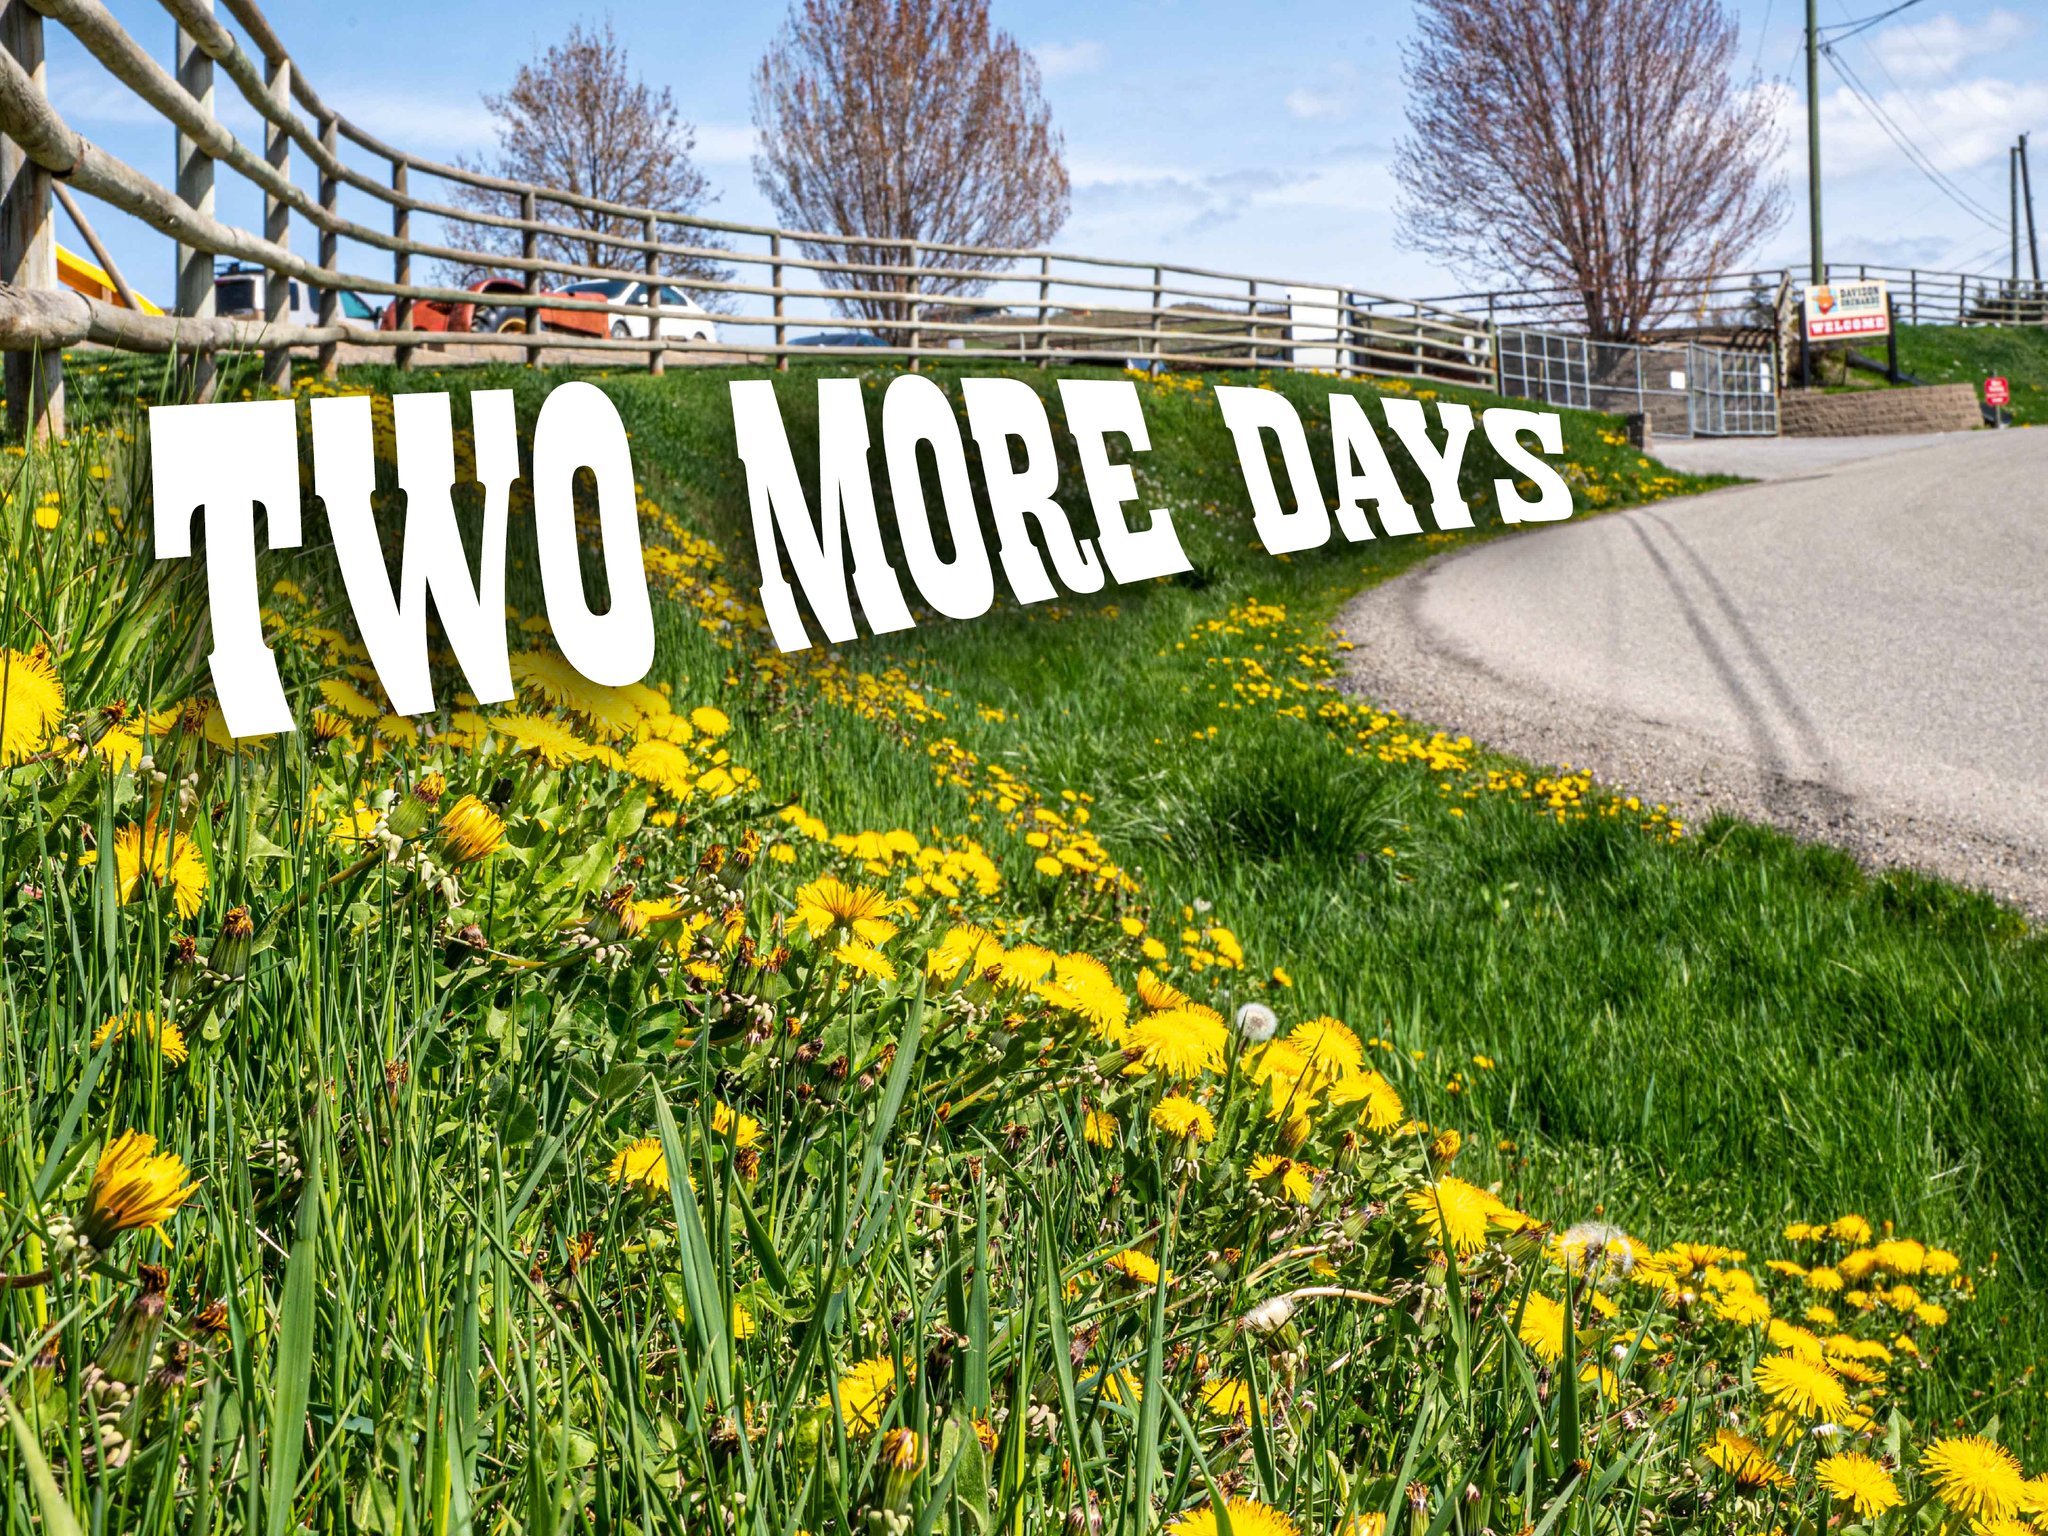 Just two more days... We open Wednesday May 1st!!
We can hardly wait for it. Stay tuned because we have a exciting surprise that we are sure you are going to love.